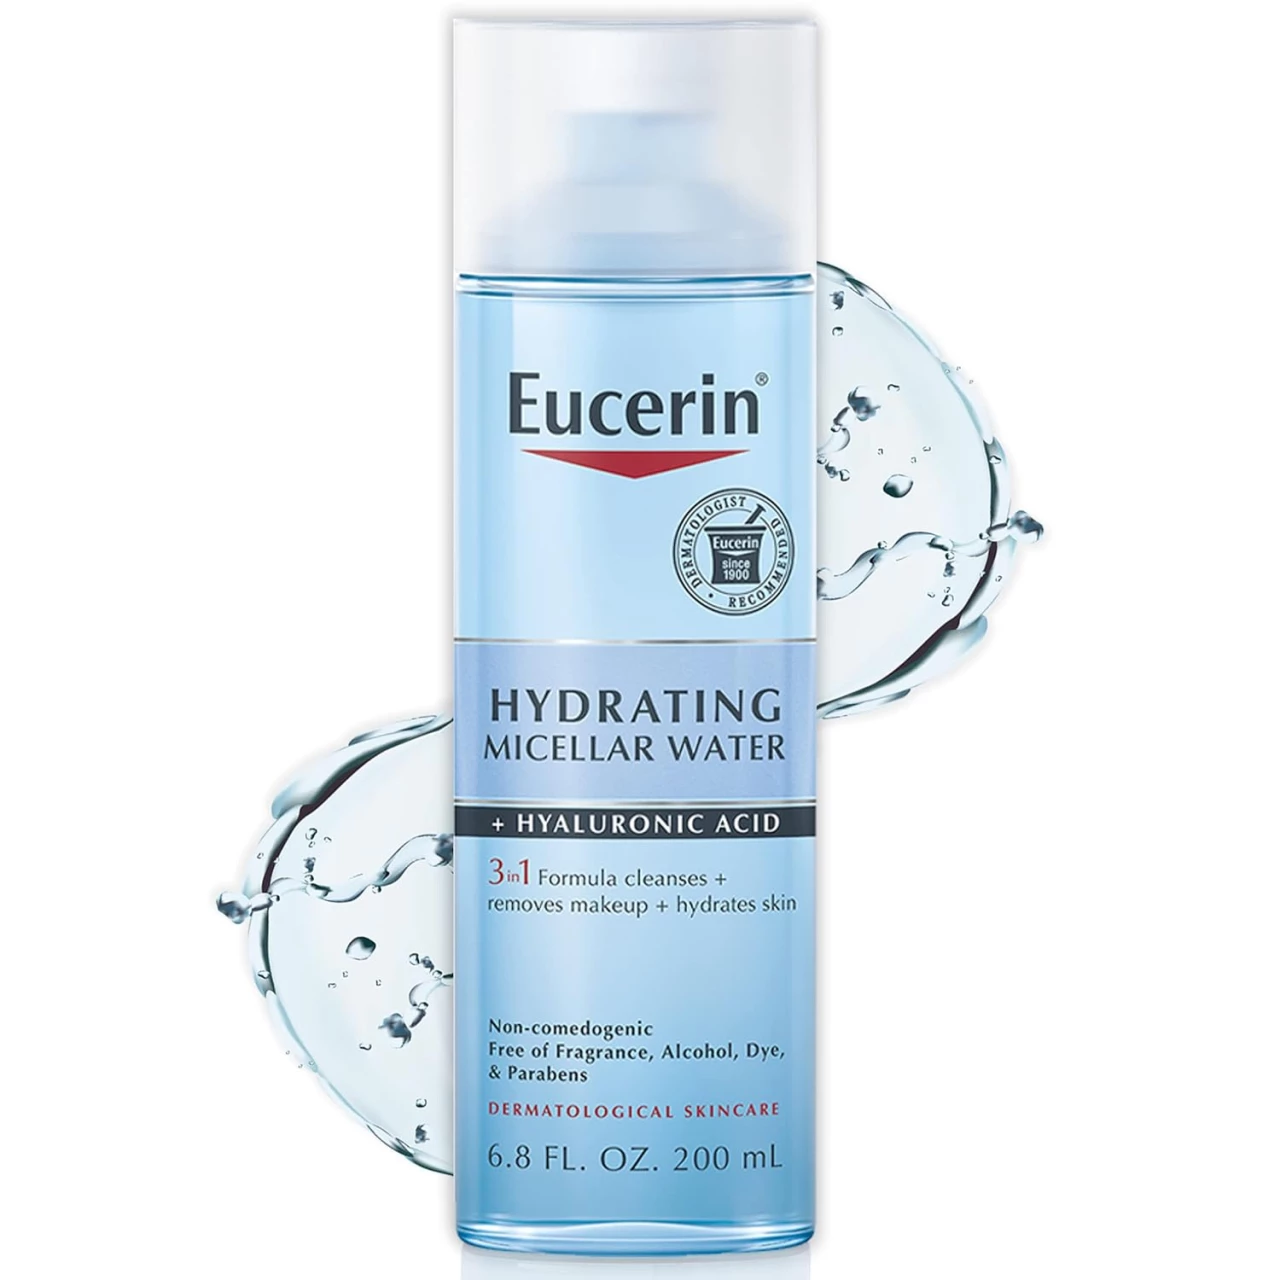 Eucerin Hydrating 3-in-1 Micellar Water, Formulated with Hyaluronic Acid